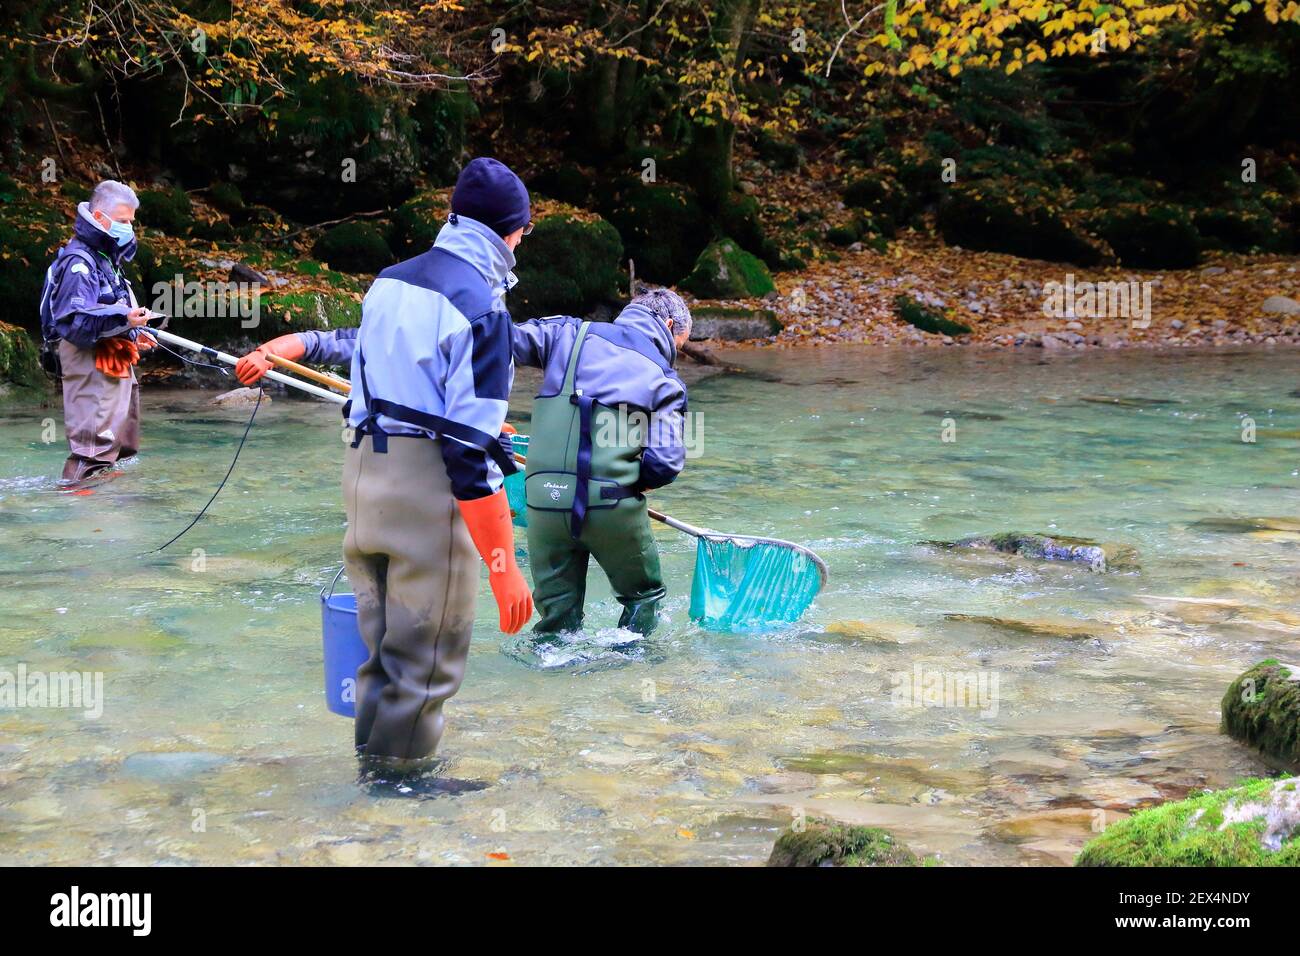 Electric fishing on the Guiers, labeled wild river, Parc Naturel Regional de Chartreuse, Alpes, France Stock Photo